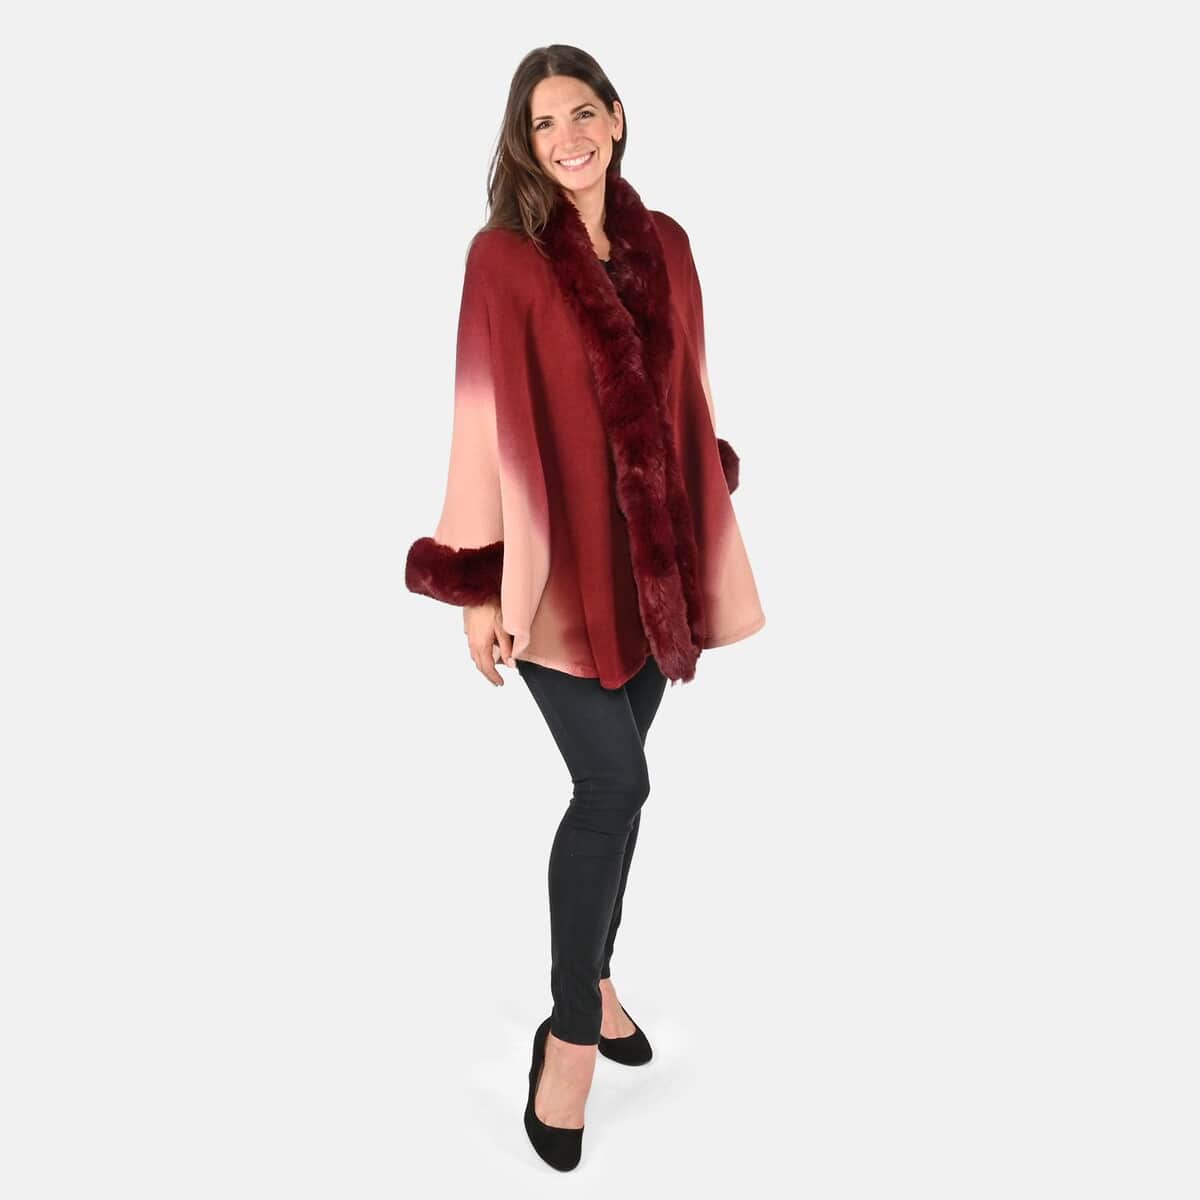 Tamsy Burgundy Ombre Cape with Faux Fur Trim - One Size Fits Most image number 0